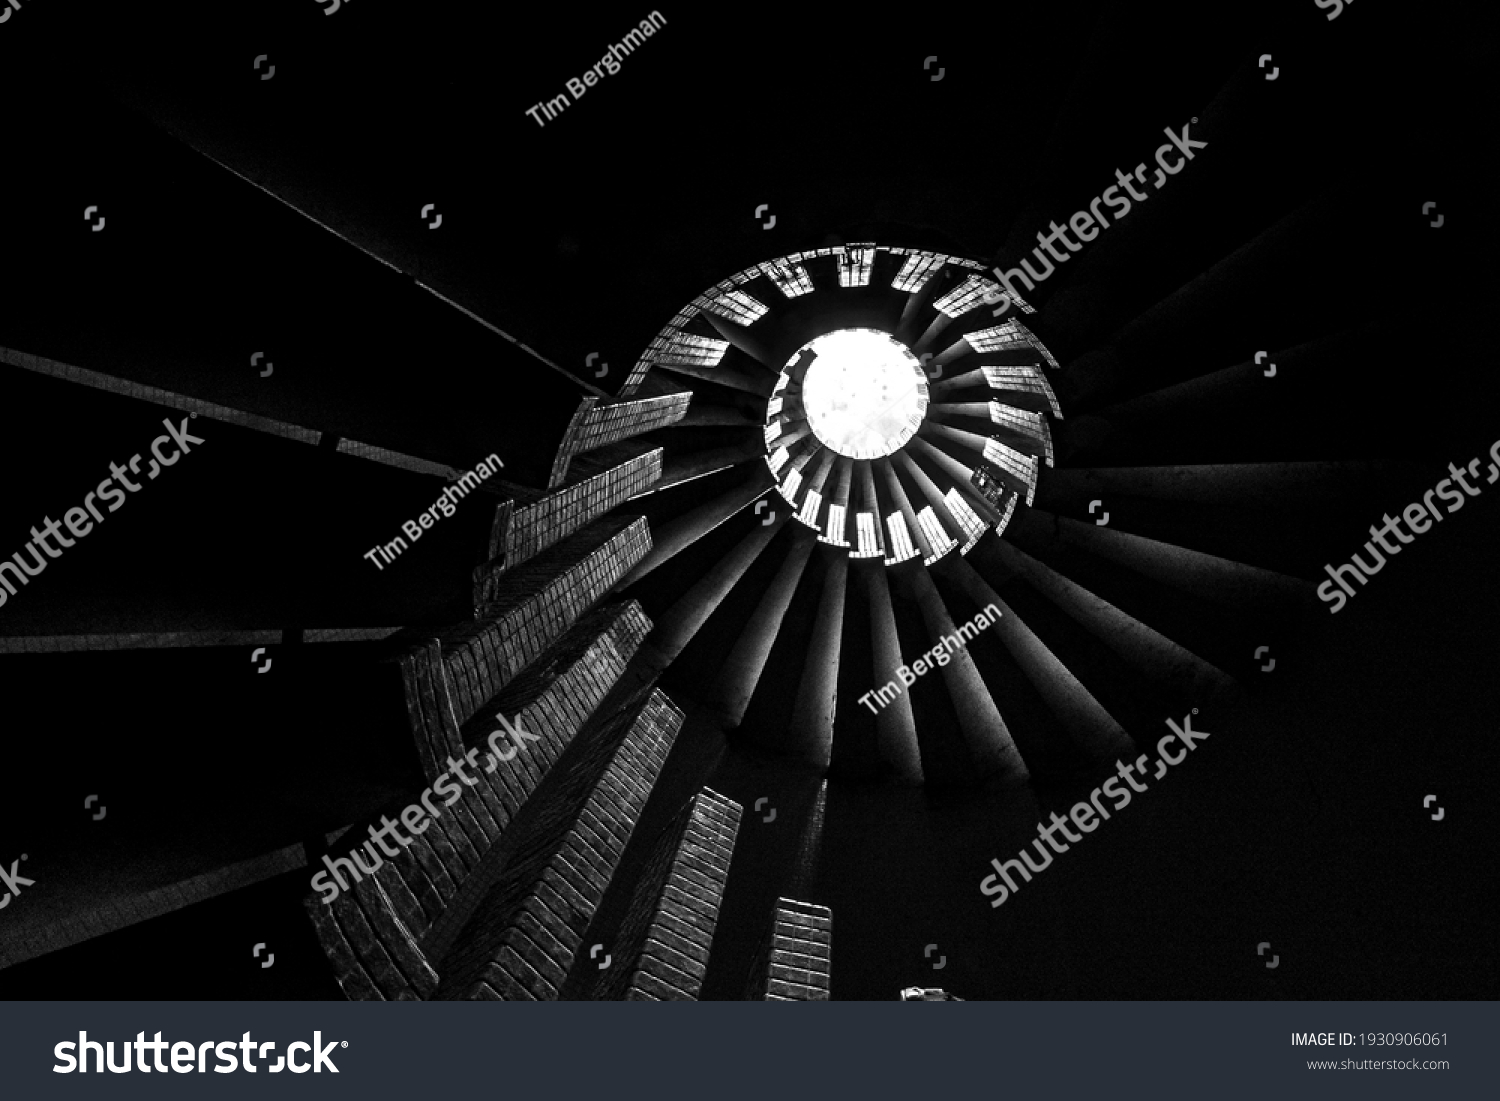 Spiral staircase with steps, upward view of a skylight, in monochrome #1930906061